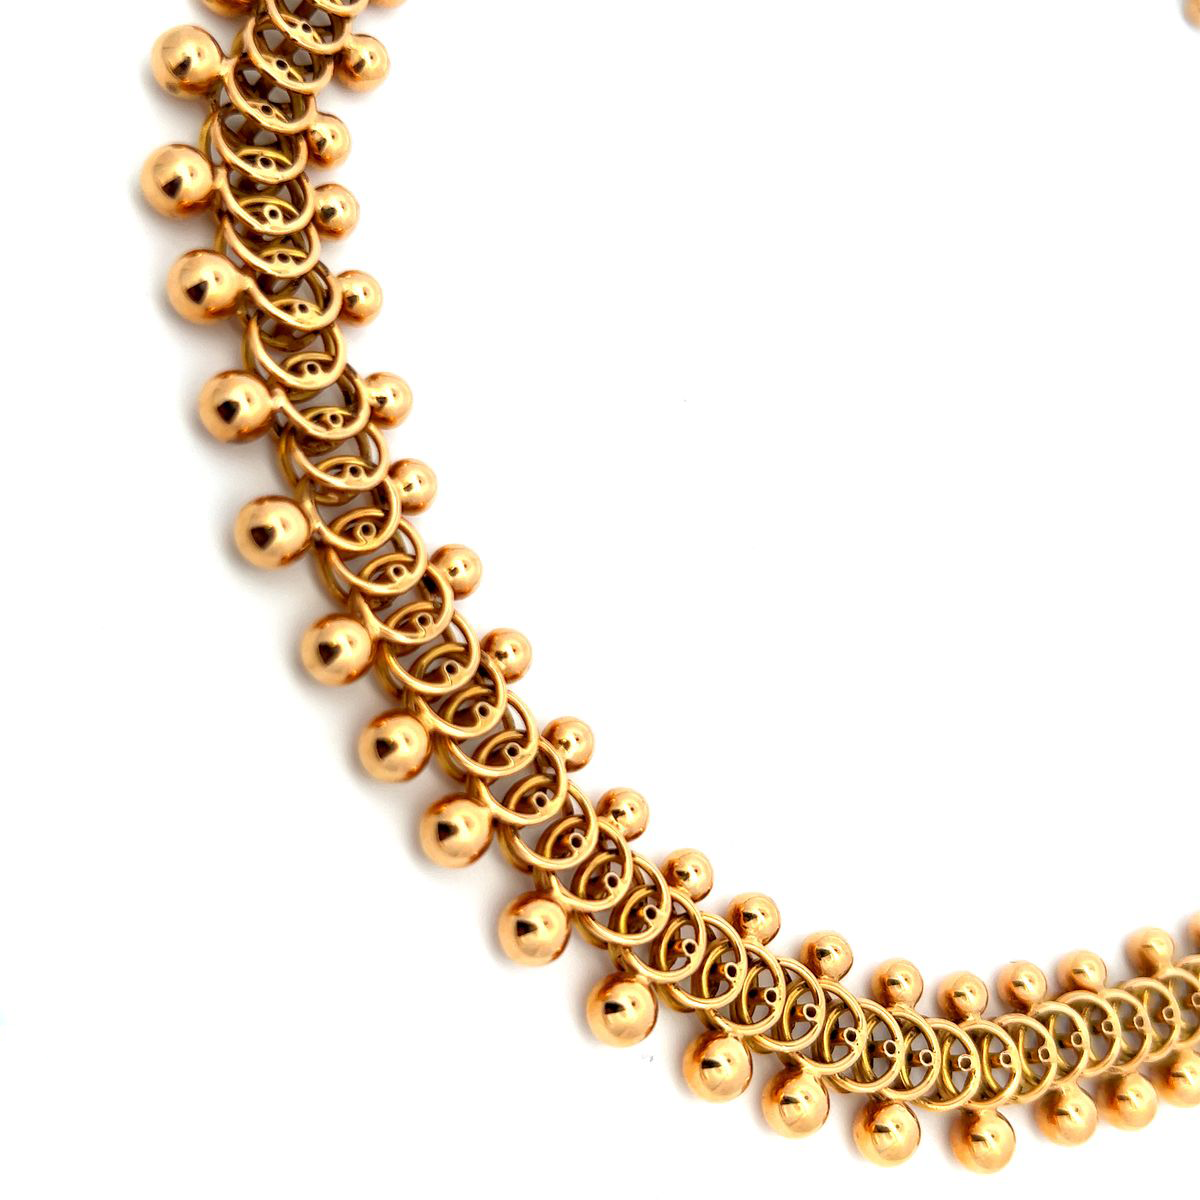 1950s 18KT Yellow Gold Necklace close-up details